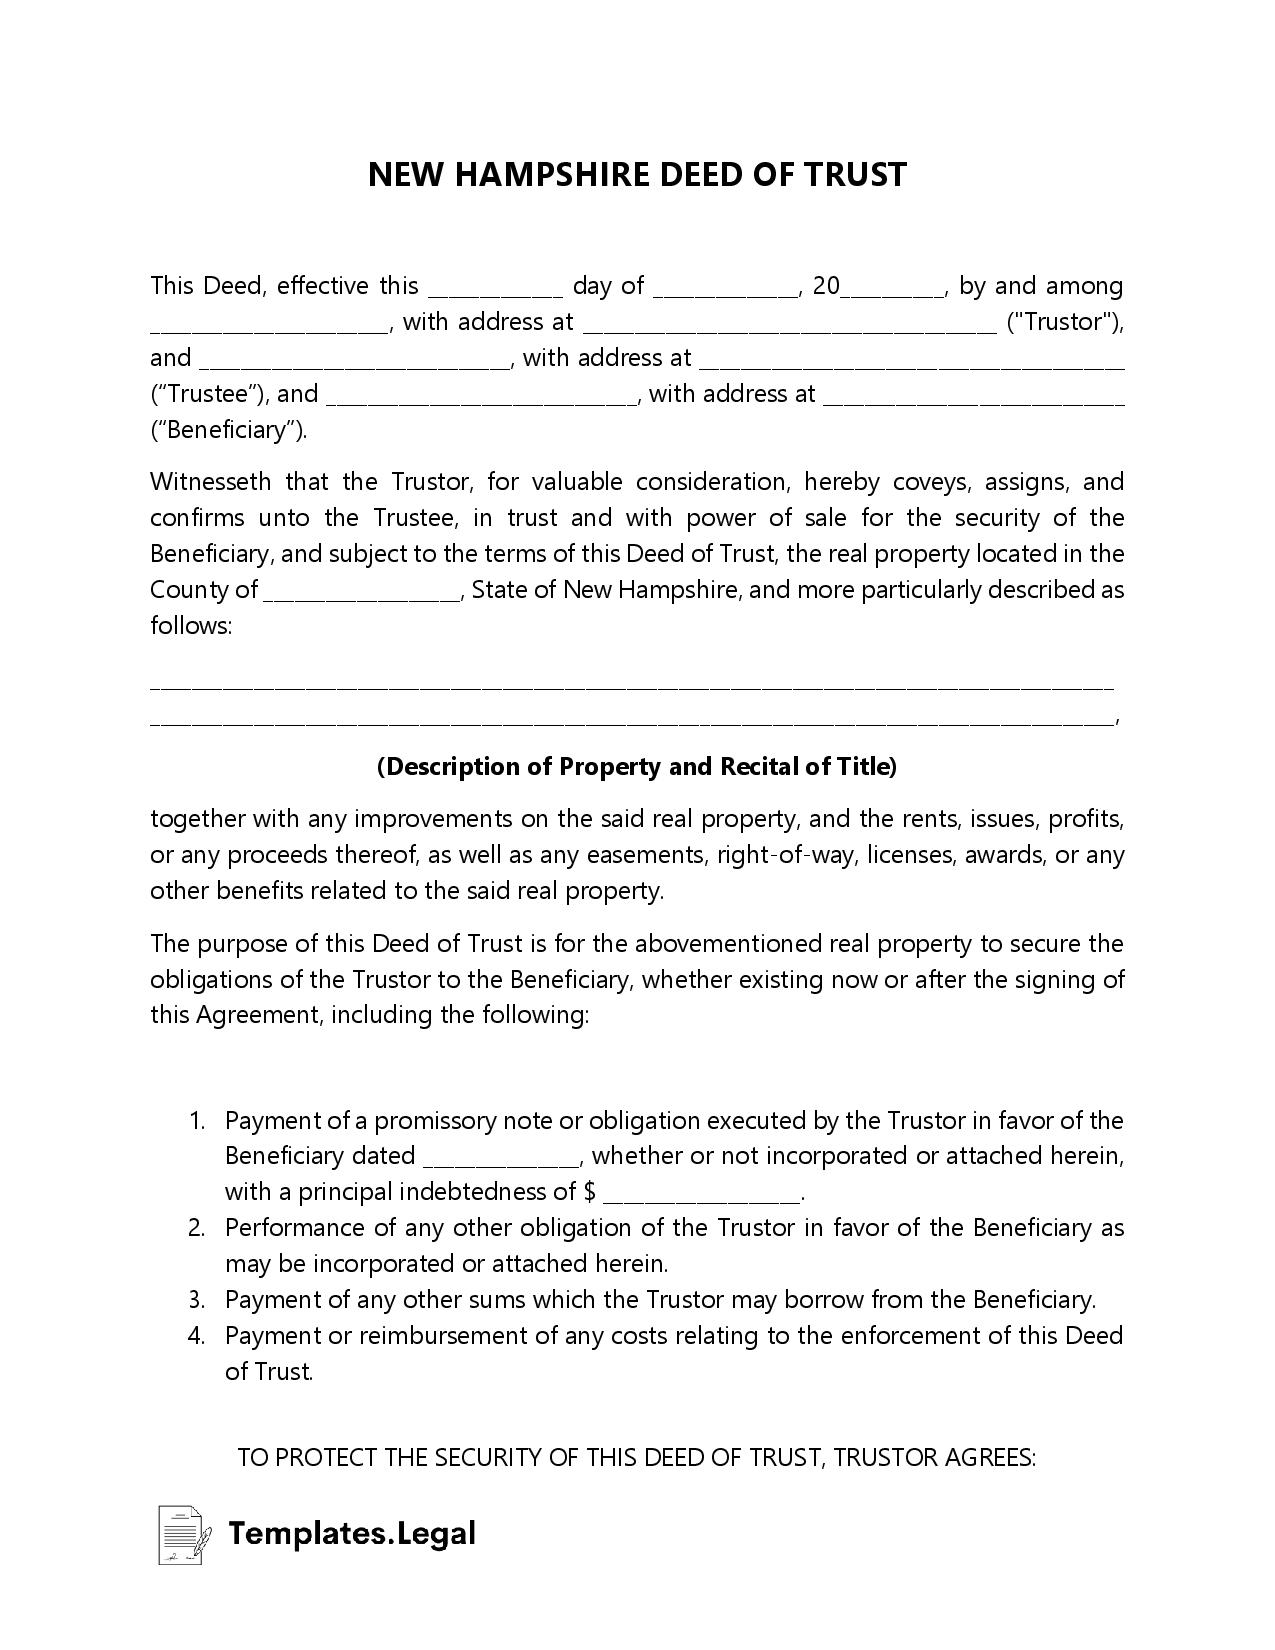 New Hampshire Deed of Trust - Templates.Legal